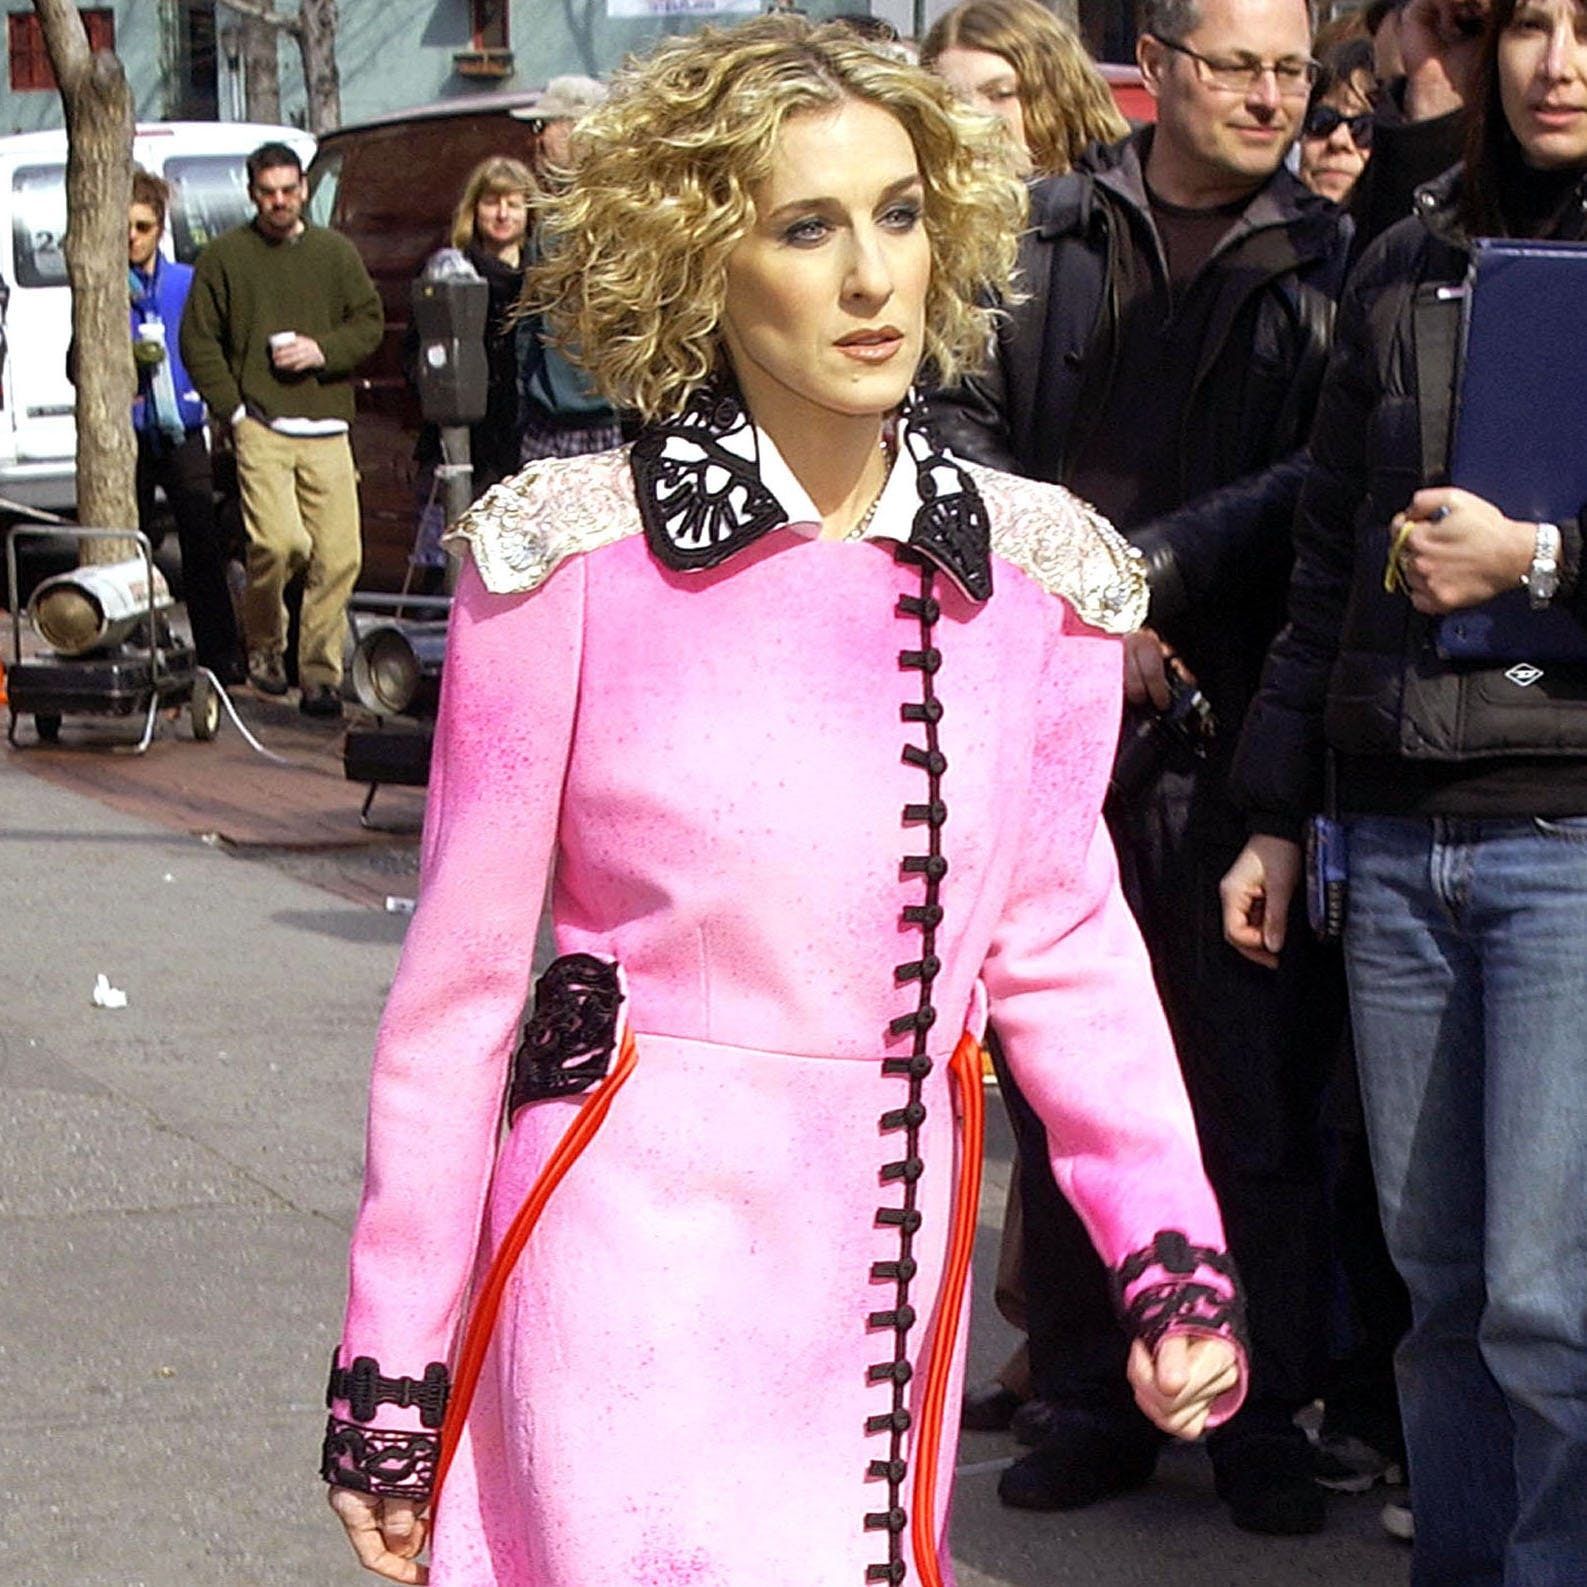 In 'Emily in Paris,' Patricia Field Pays Homage to Carrie Bradshaw